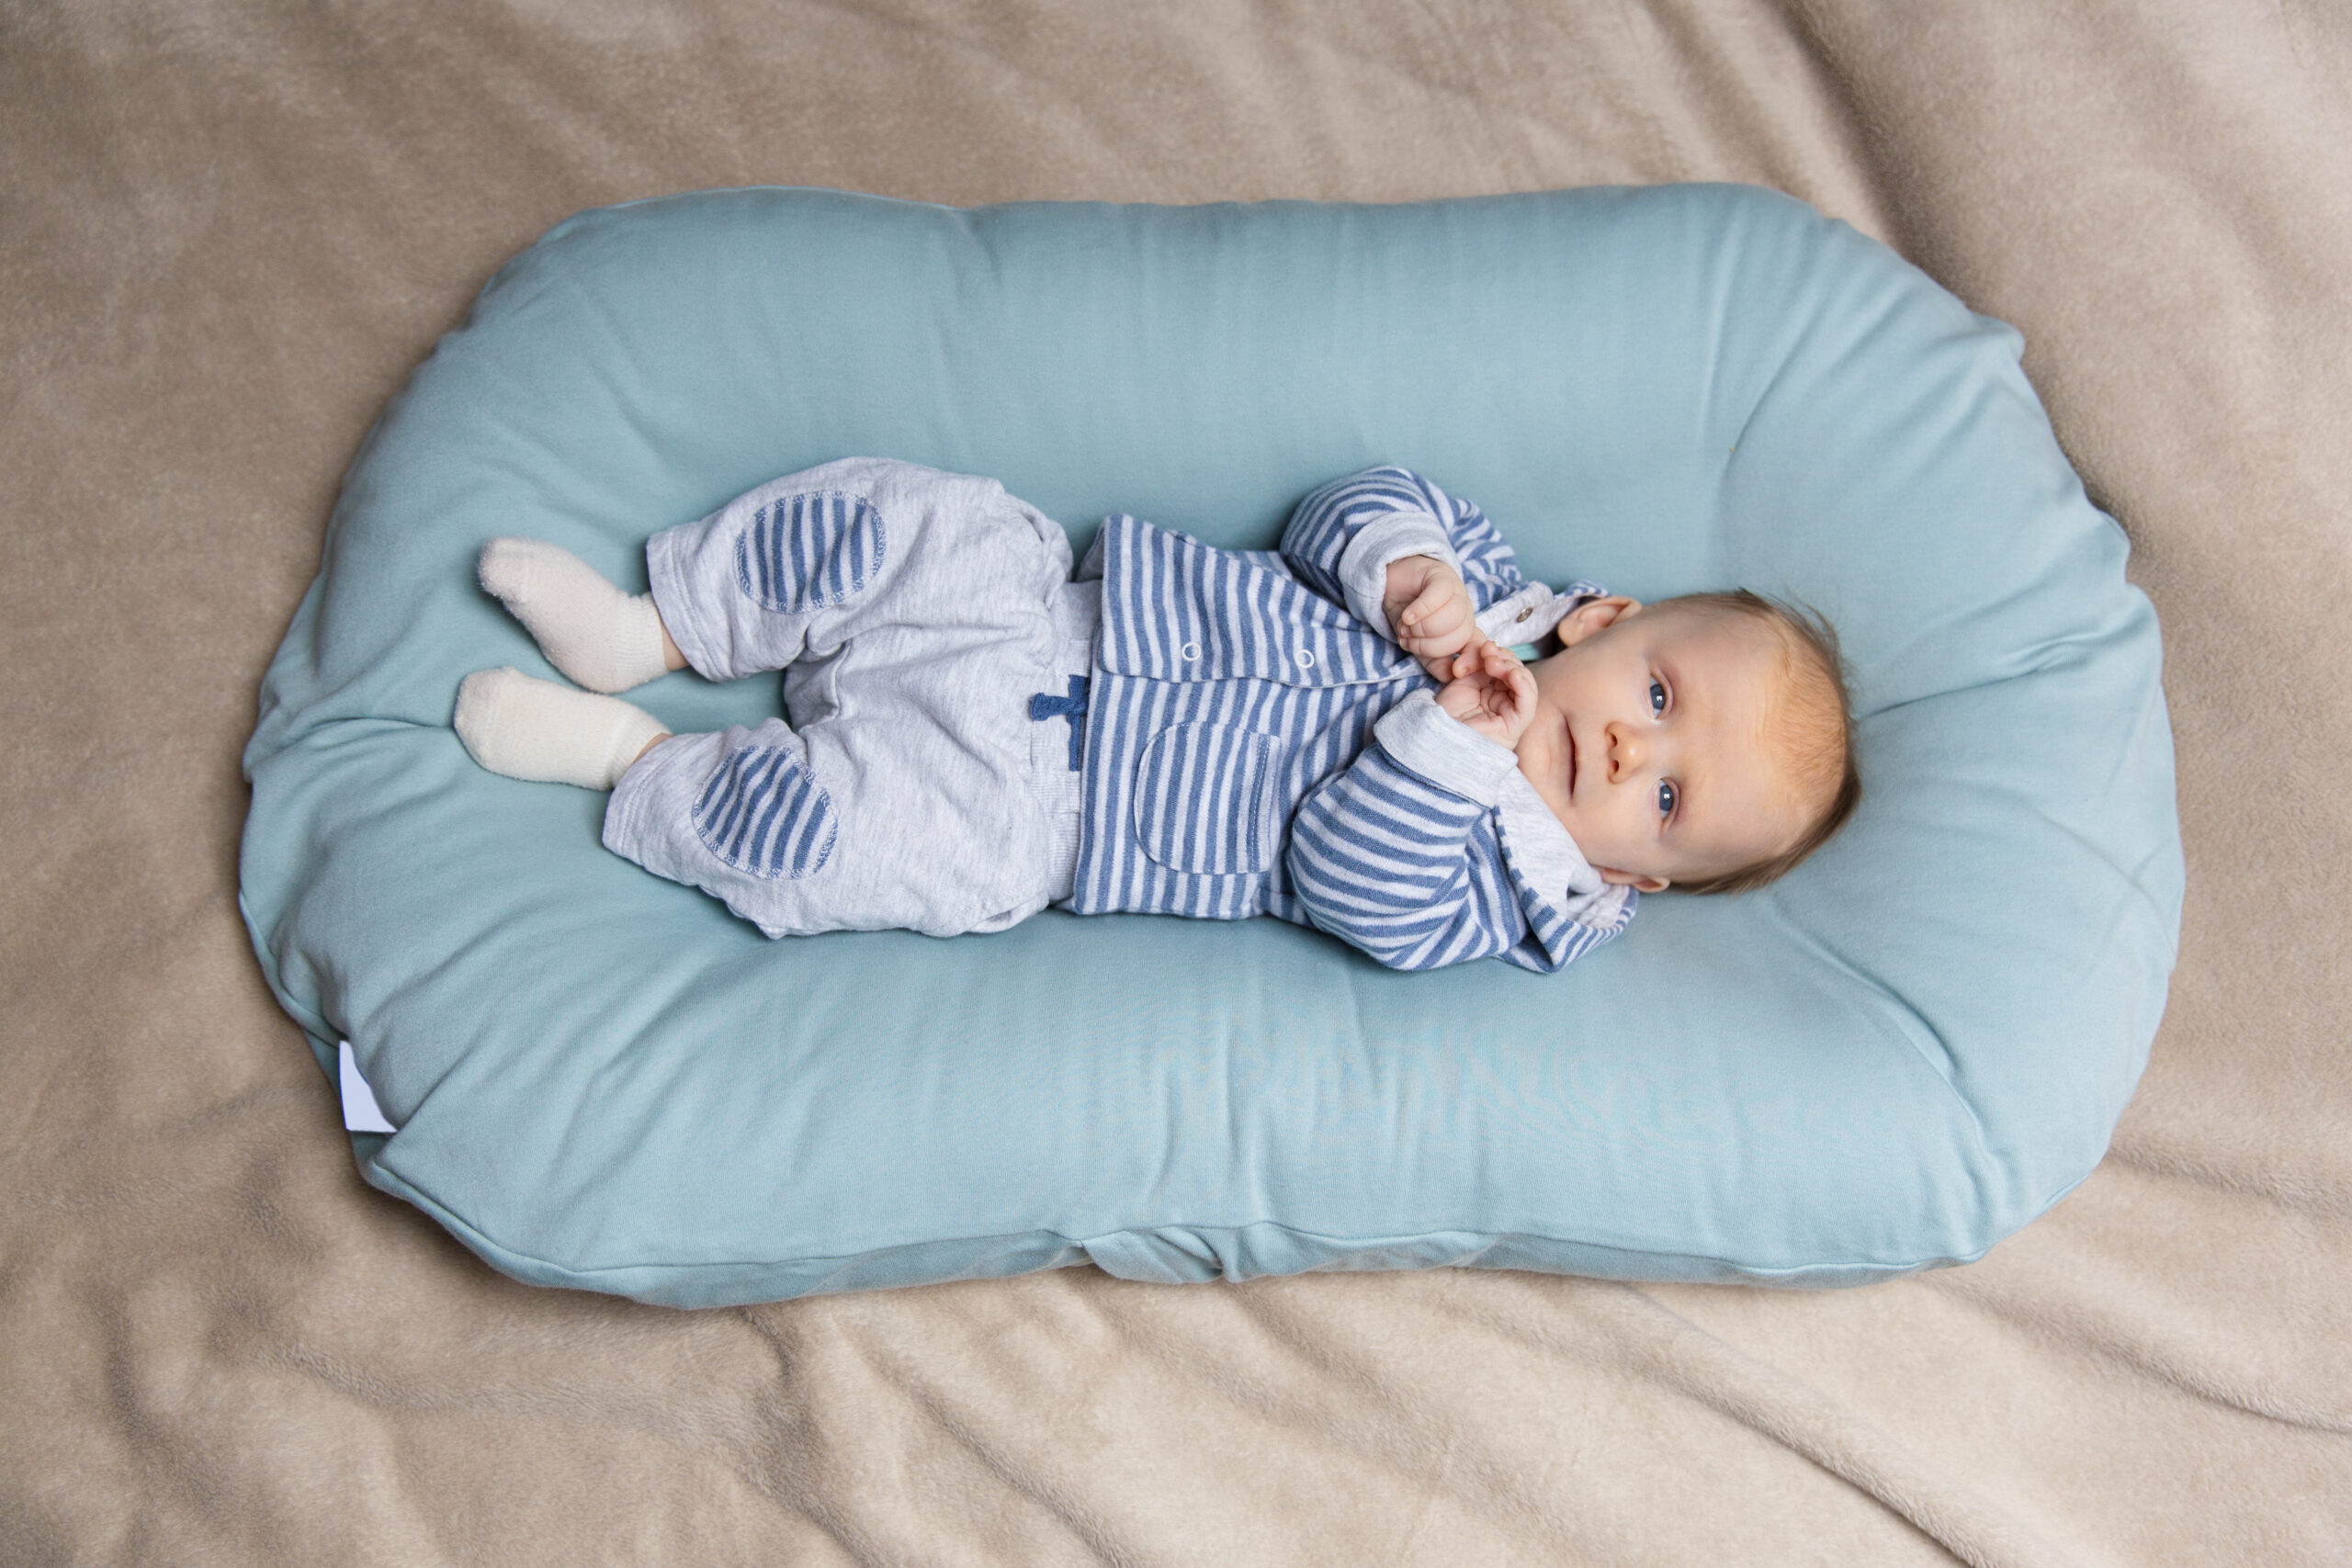 More Infant Lounger Deaths Than Previously Reported